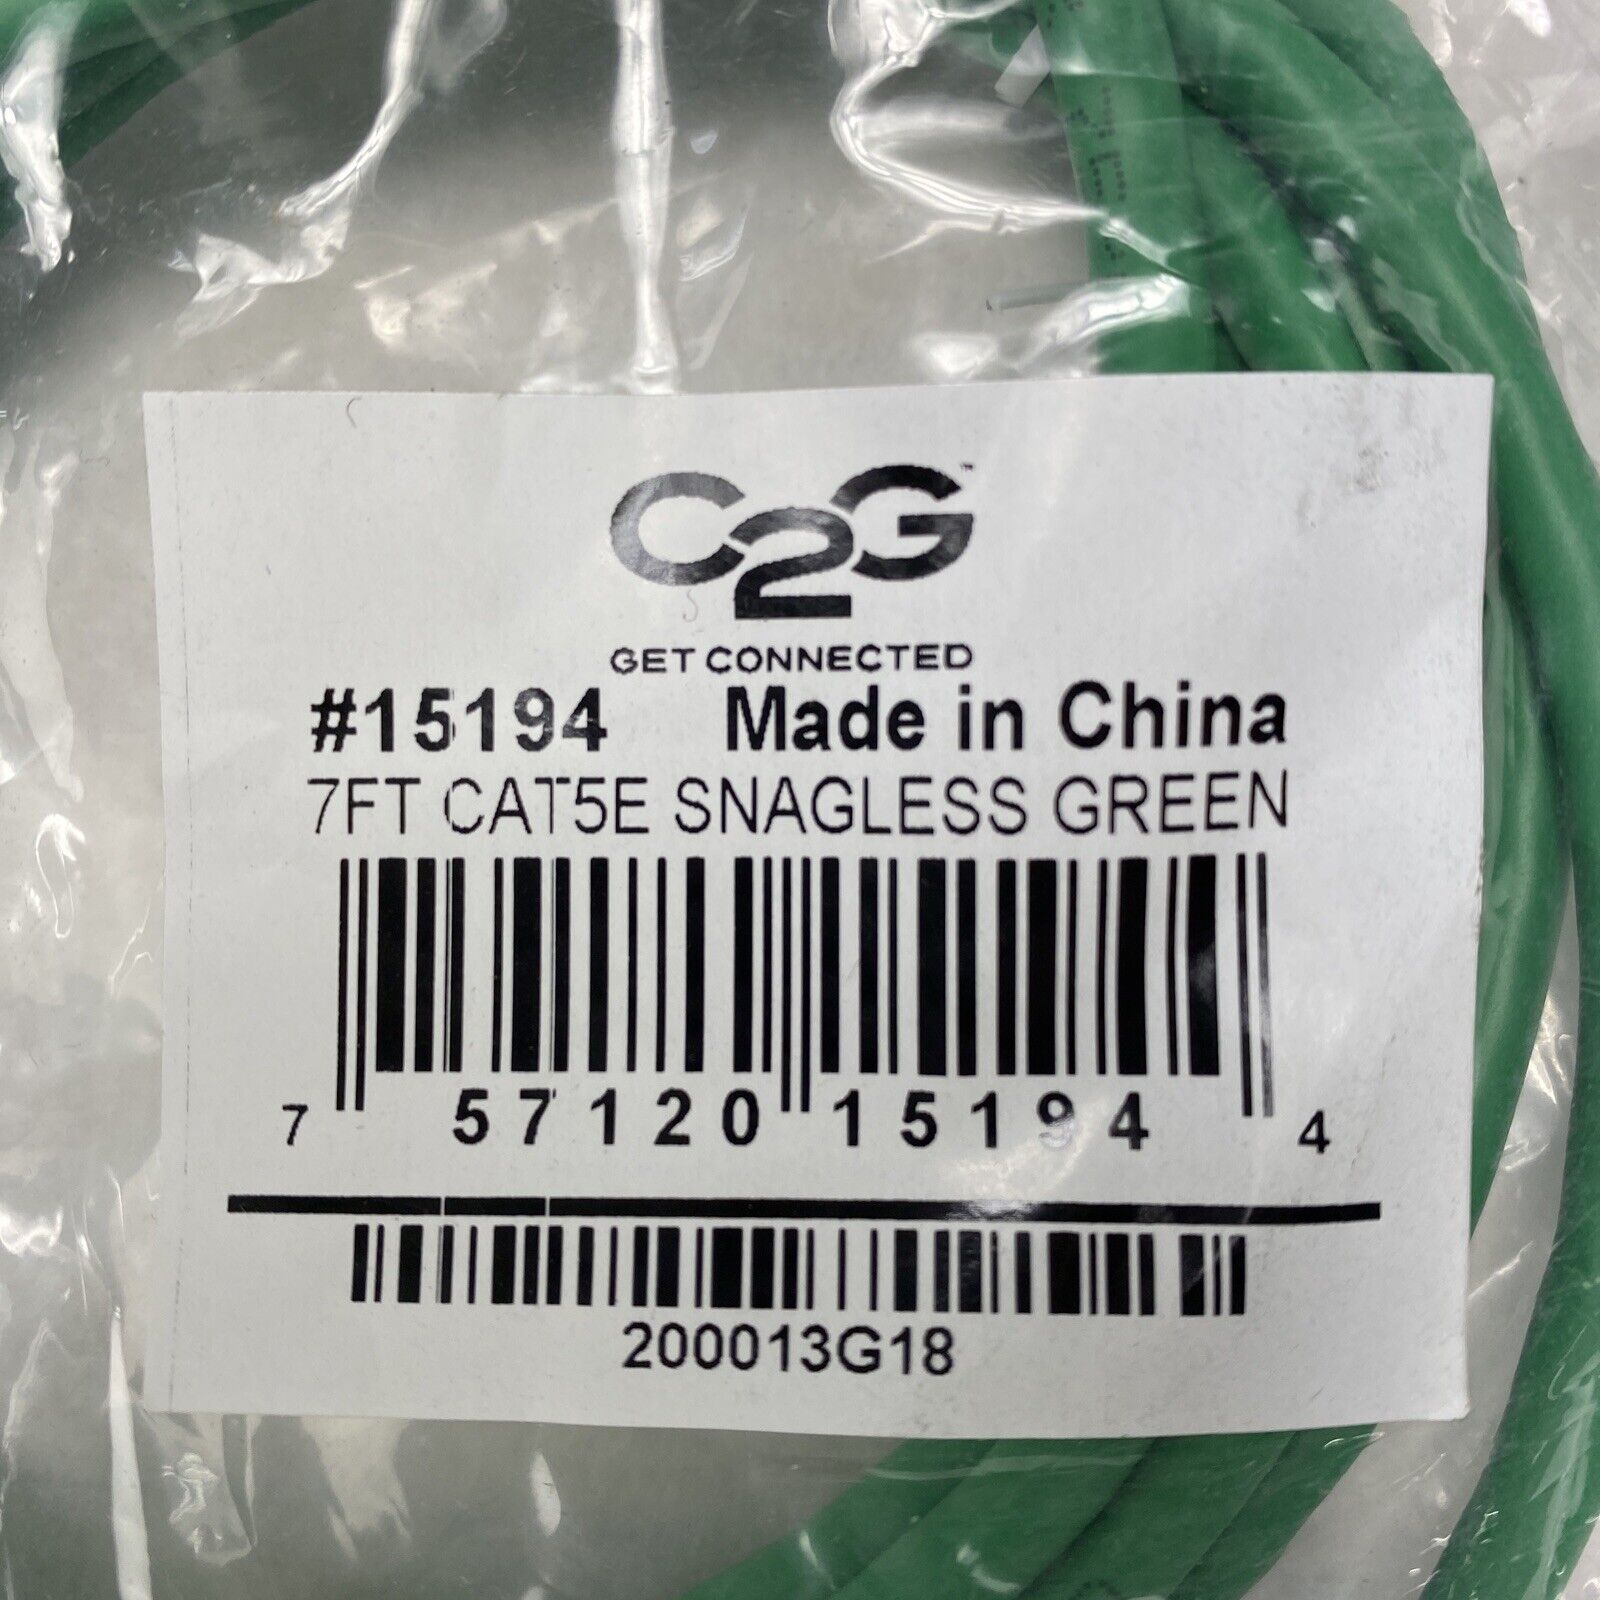 Lot( 10 ) 7ft Green Cat5e C2G 15194 Snagless Unshielded UTP Ethernet Patch Cable